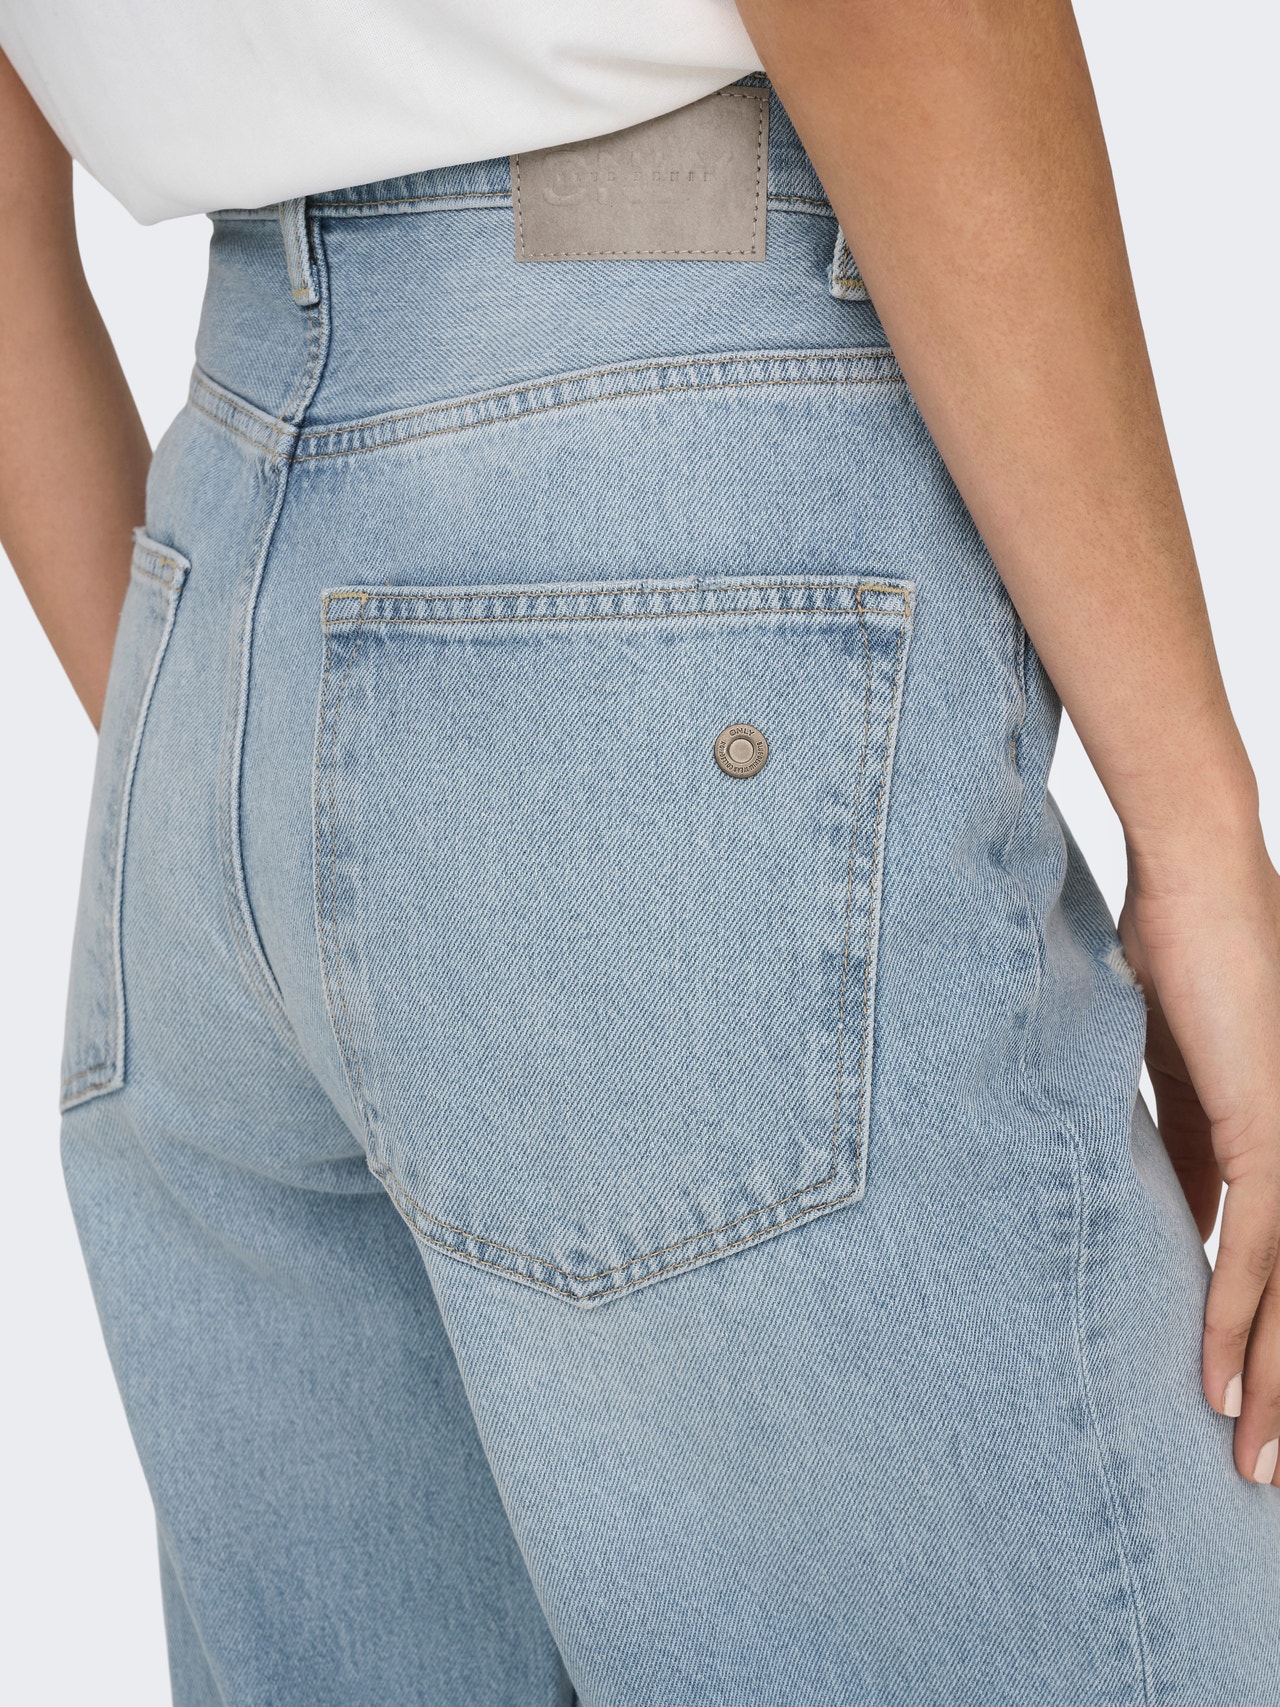 ONLY Straight fit Extra hight waist Jeans -Light Blue Denim - 15282727